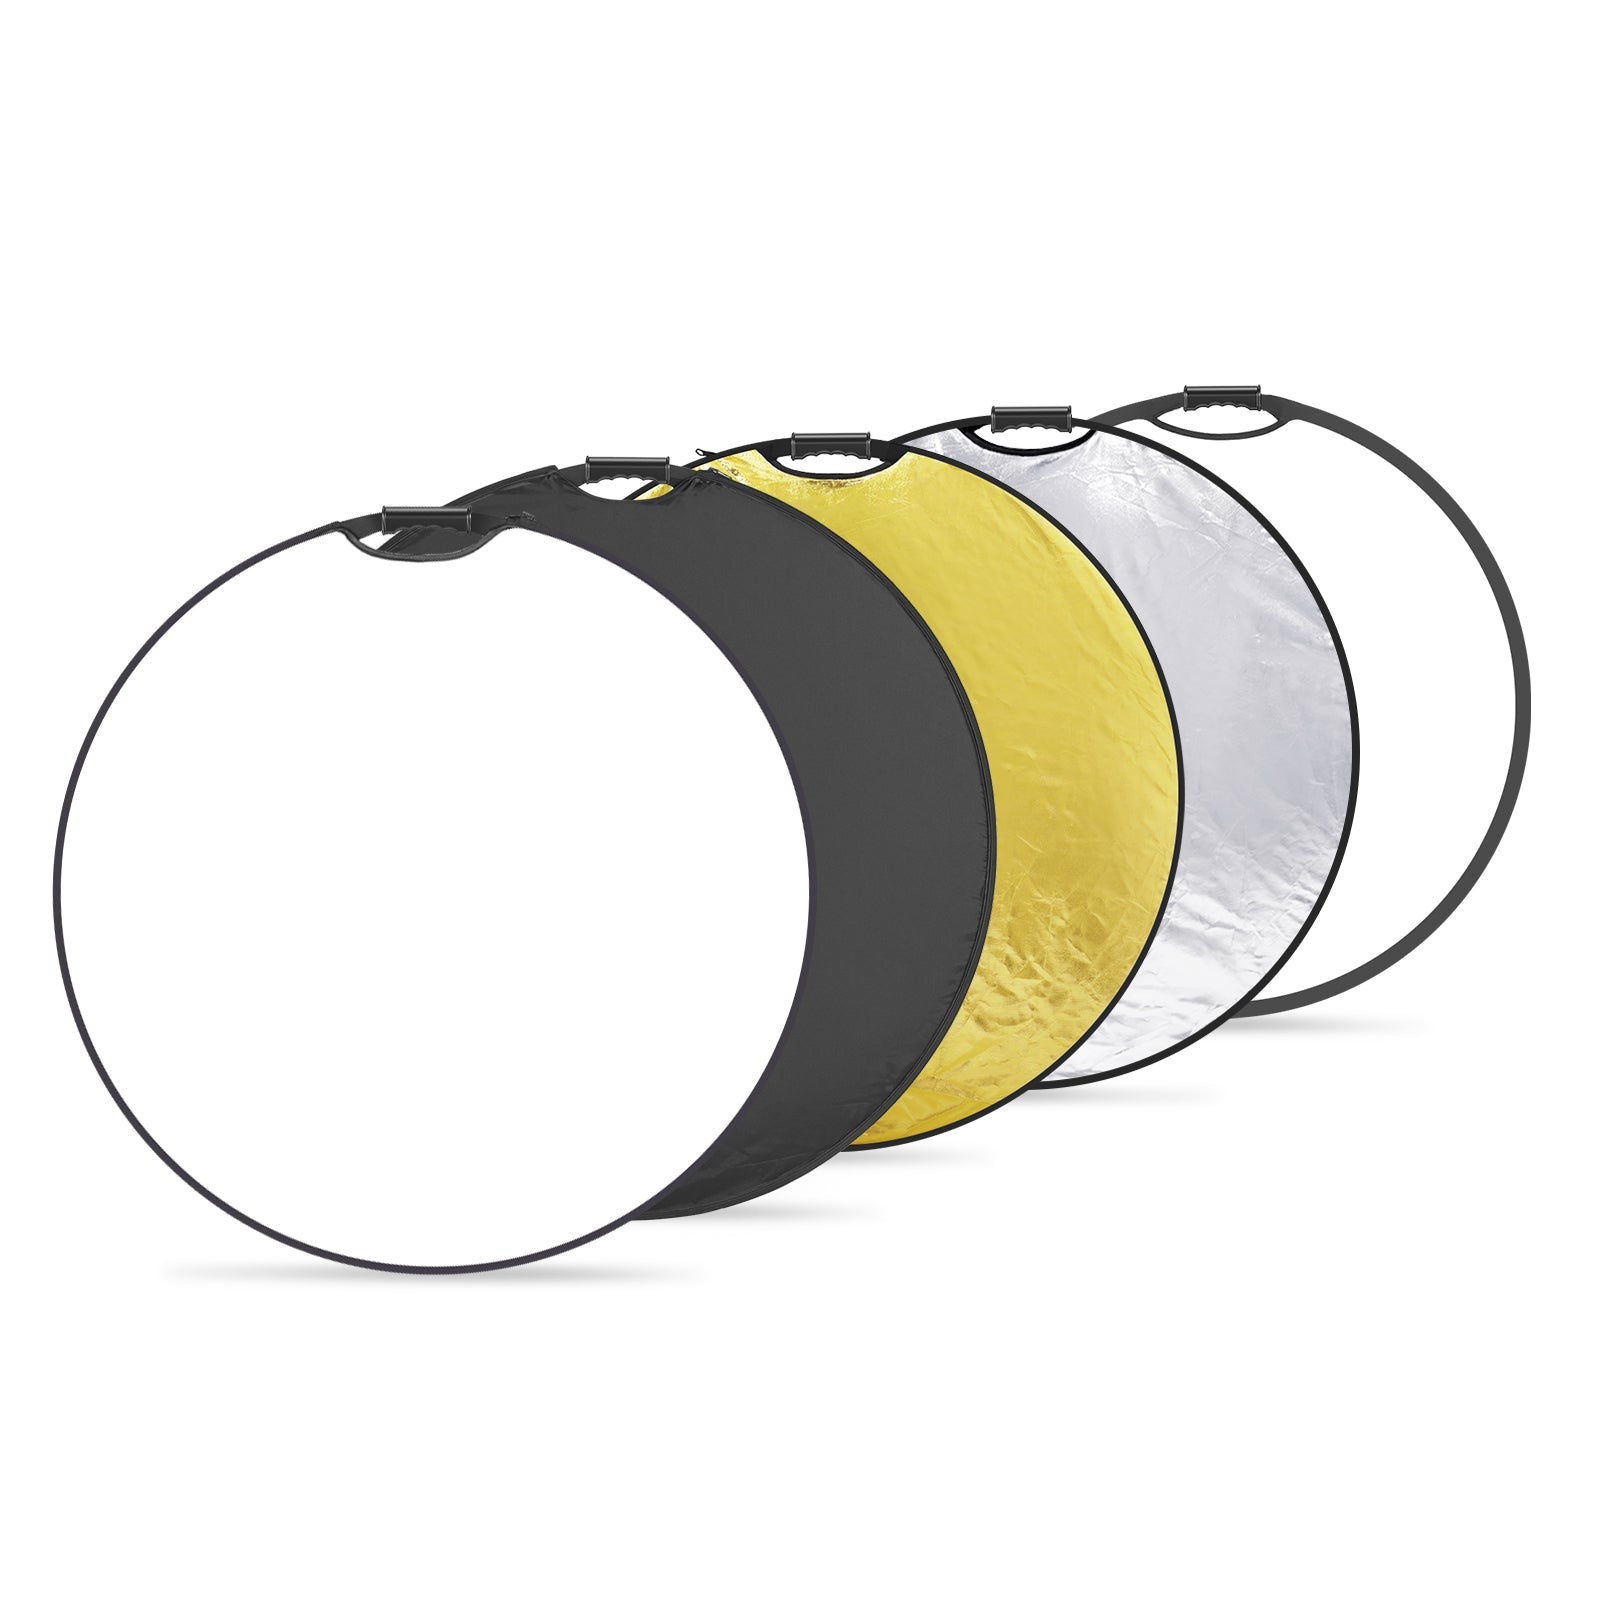 Neewer 5-in-1 Portable Round Light Reflector